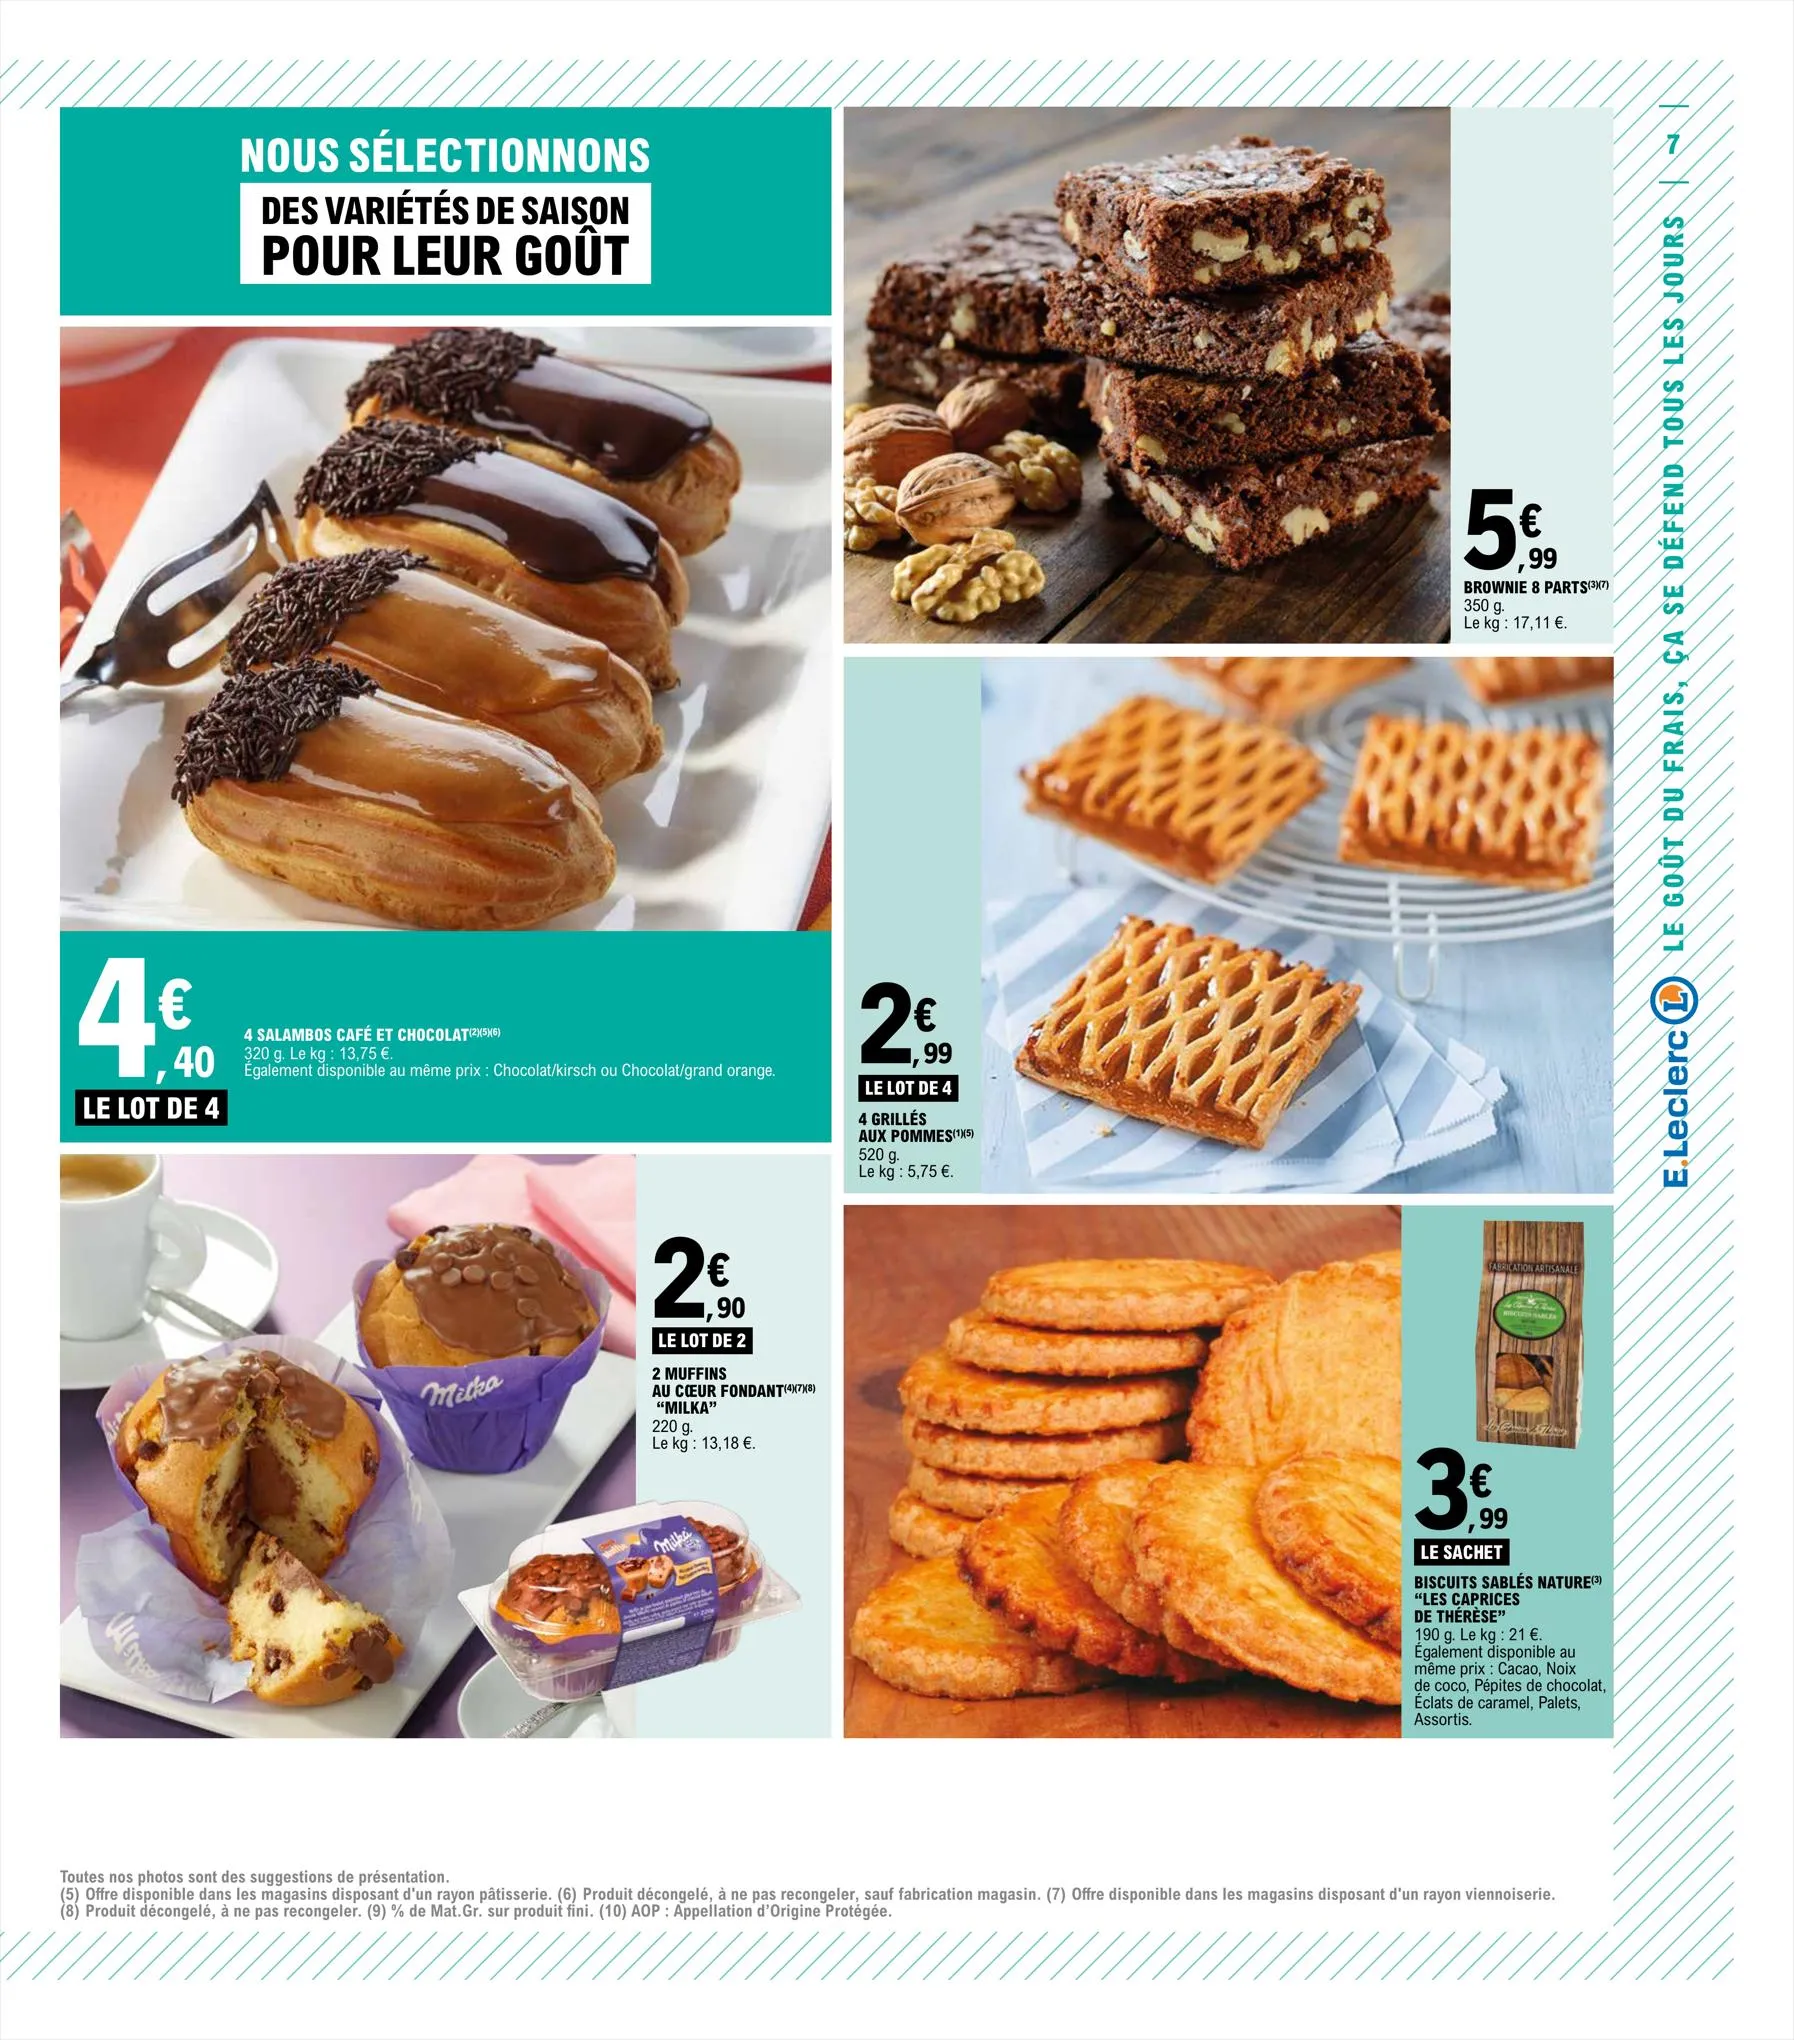 Catalogue Relance Alimentaire 10 - Mixte, page 00007